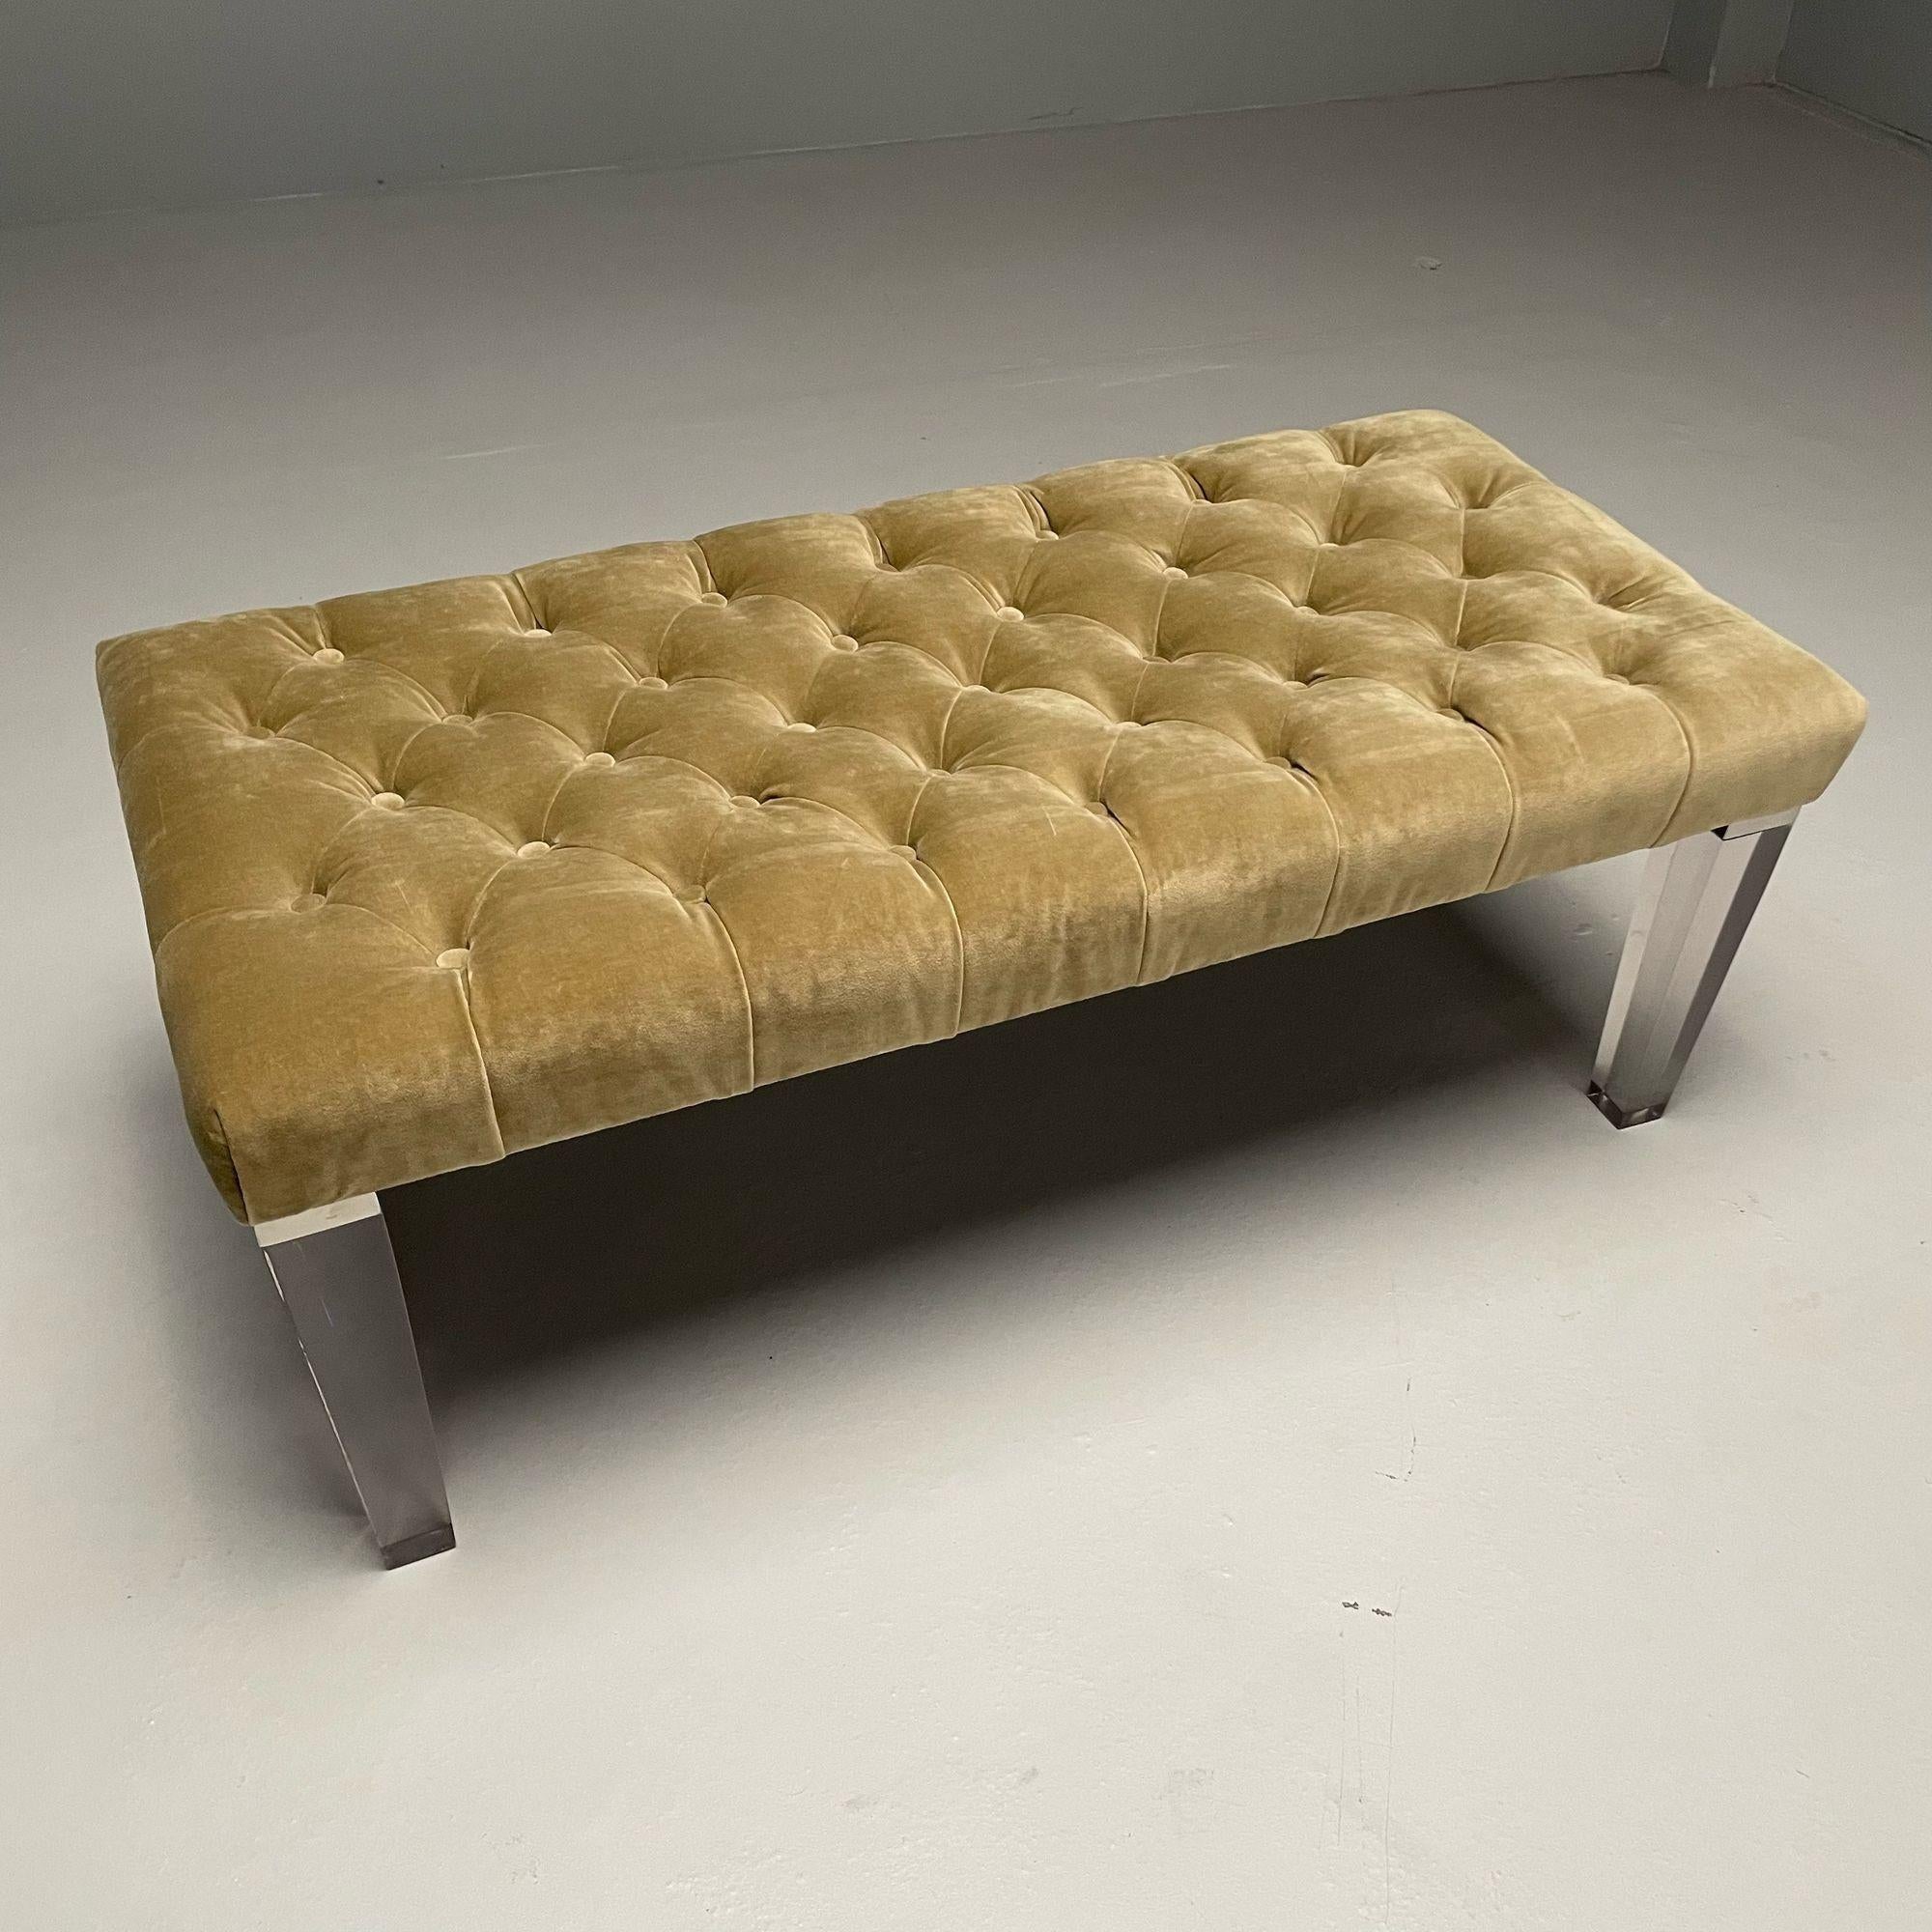 American Contemporary, Modern Tufted Window Bench, Chrome, Acrylic, Green Velvet, 2010s For Sale